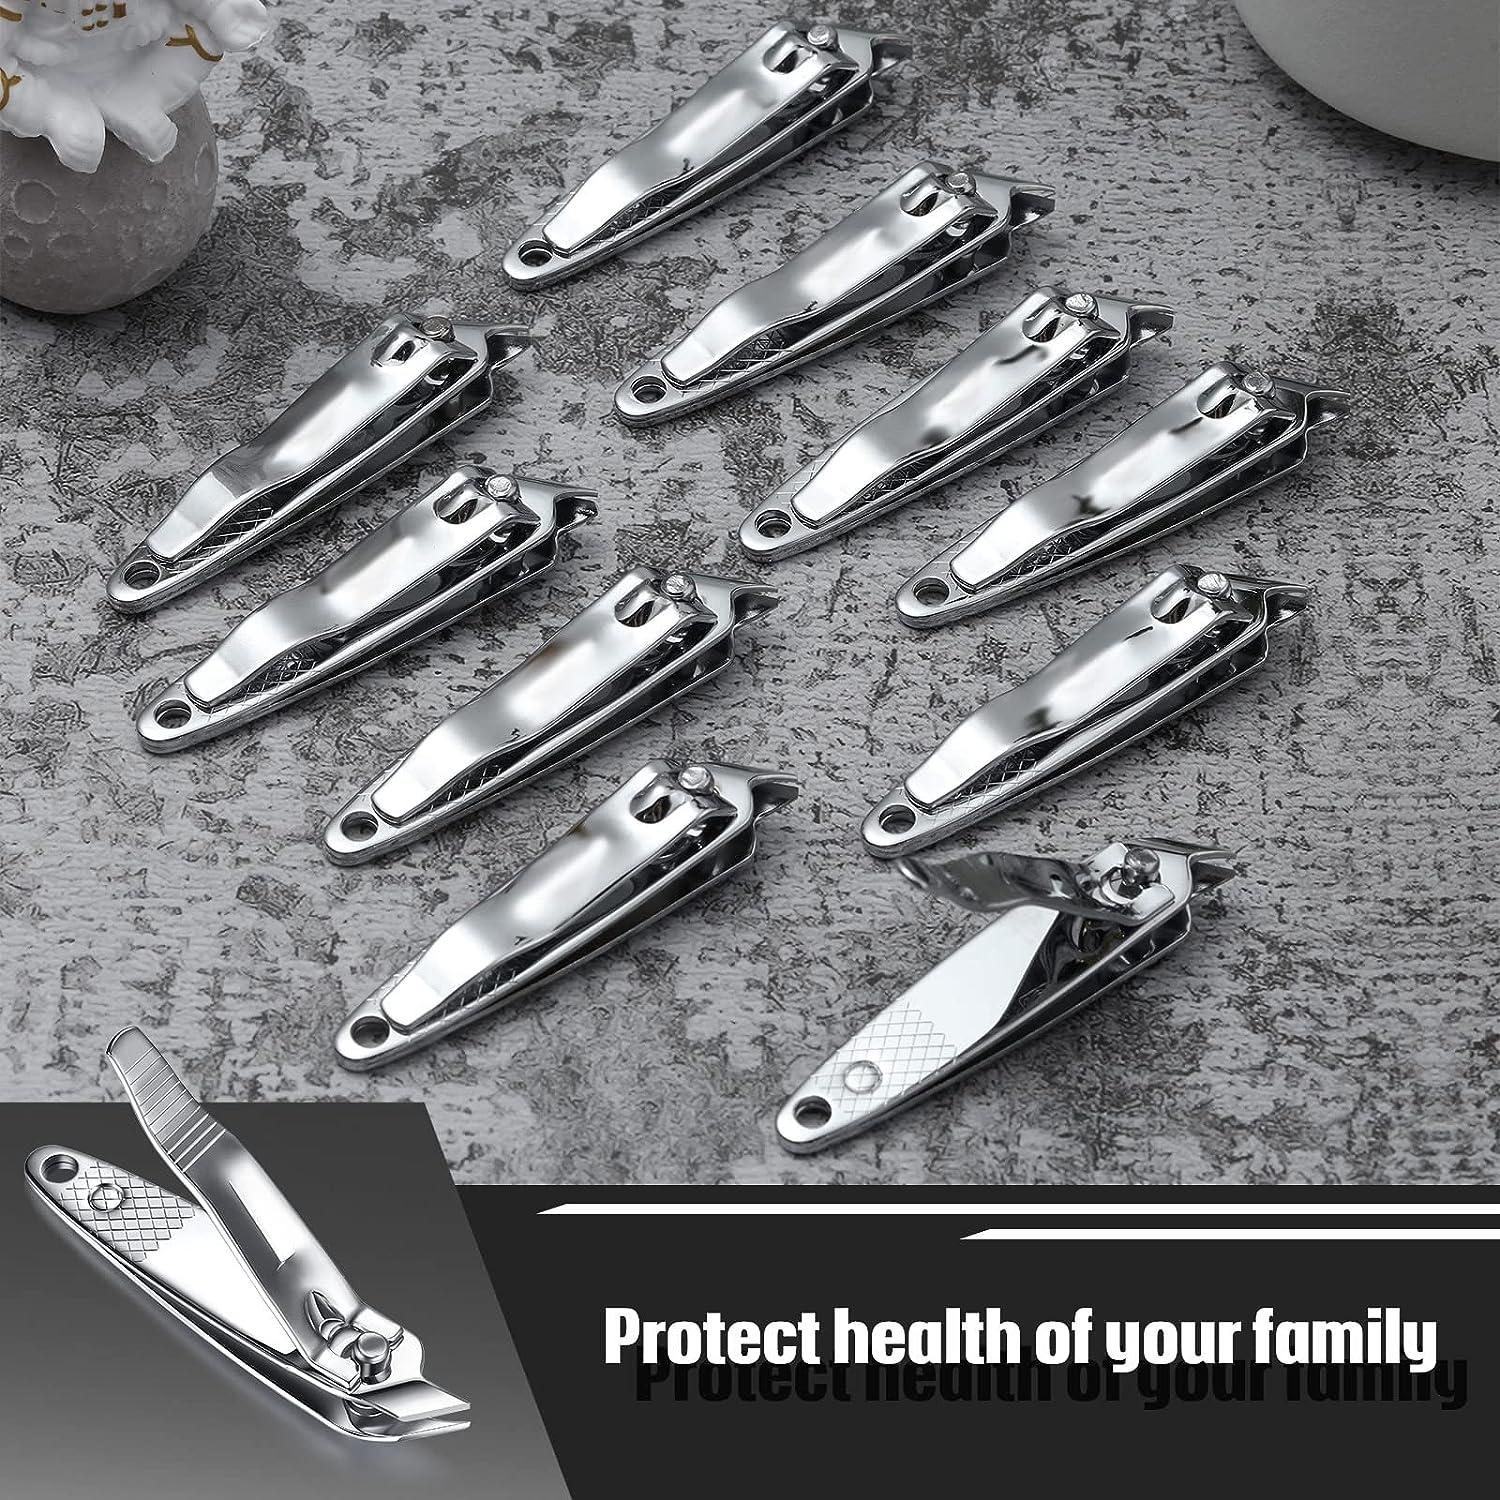 12 Pcs Slanted Edge Nail Clippers Metal Side Cuticle Clippers for Nails  Cutting Curved Nail Edge Trimmer Cutter Angled Travel Pedicure Manicure Tool